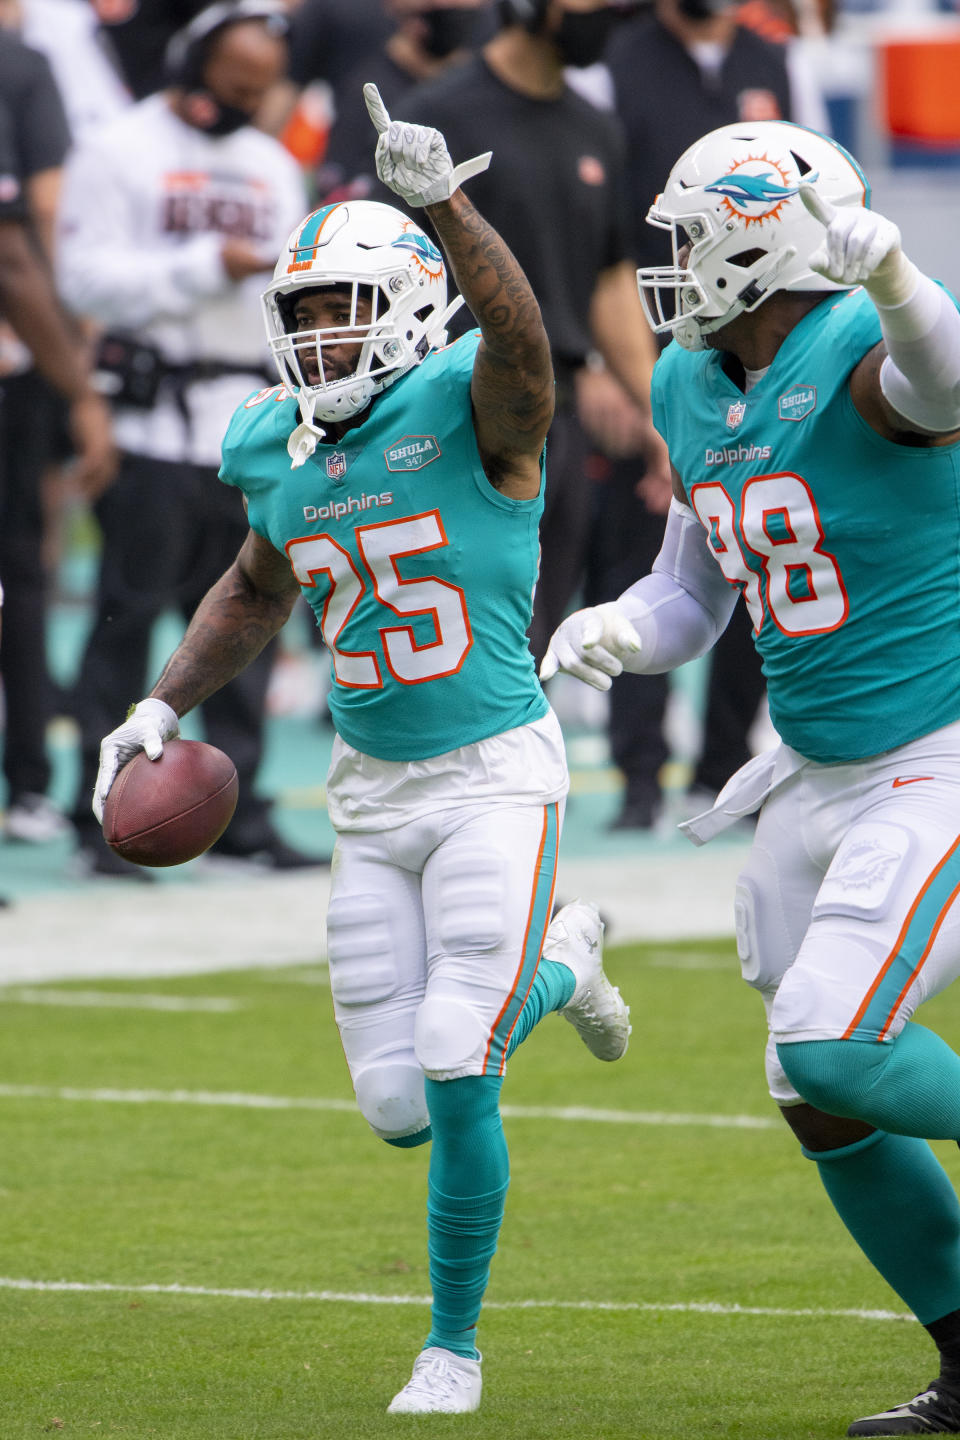 FILE - Miami Dolphins cornerback Xavien Howard (25) points to the sky as he celebrates intercepting a pass intended for Cincinnati Bengals wide receiver Tyler Boyd (not shown) along with Miami Dolphins defensive tackle Raekwon Davis (98) during an NFL football game in Miami Gardens, Fla., in this Sunday, Dec. 6, 2020, file photo. All-Pro cornerback and reigning NFL interception leader Xavien Howard wants a new contract from the Miami Dolphins, and there is no guarantee he will attend the three-day mandatory minicamp starting Tuesday, June 15, 2021. (AP Photo/Doug Murray, File)